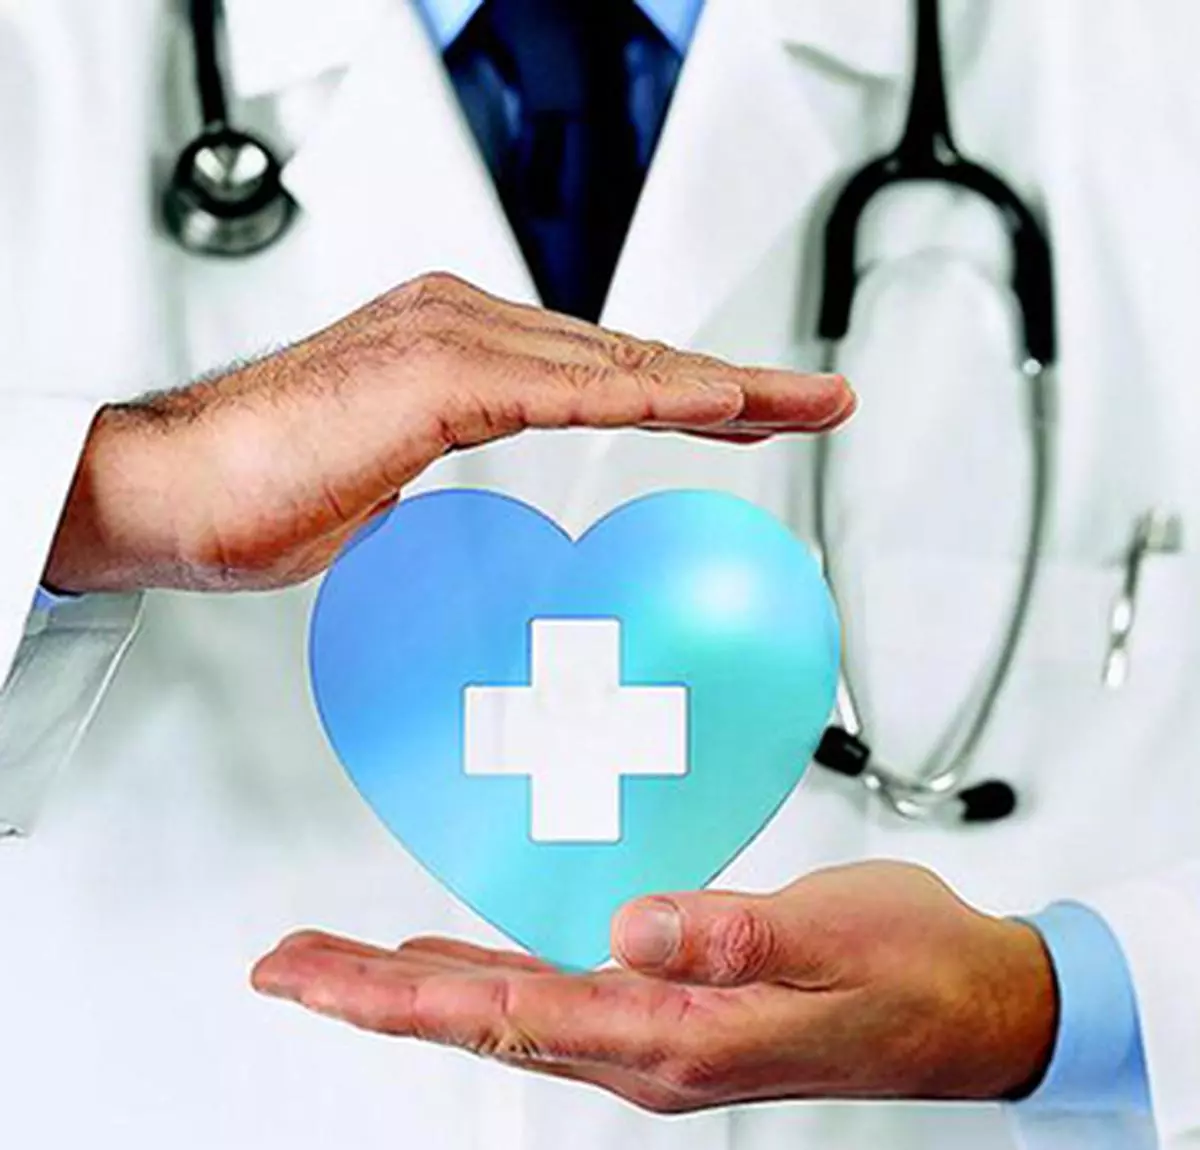 medical health insurance concept, cross and heart symbol